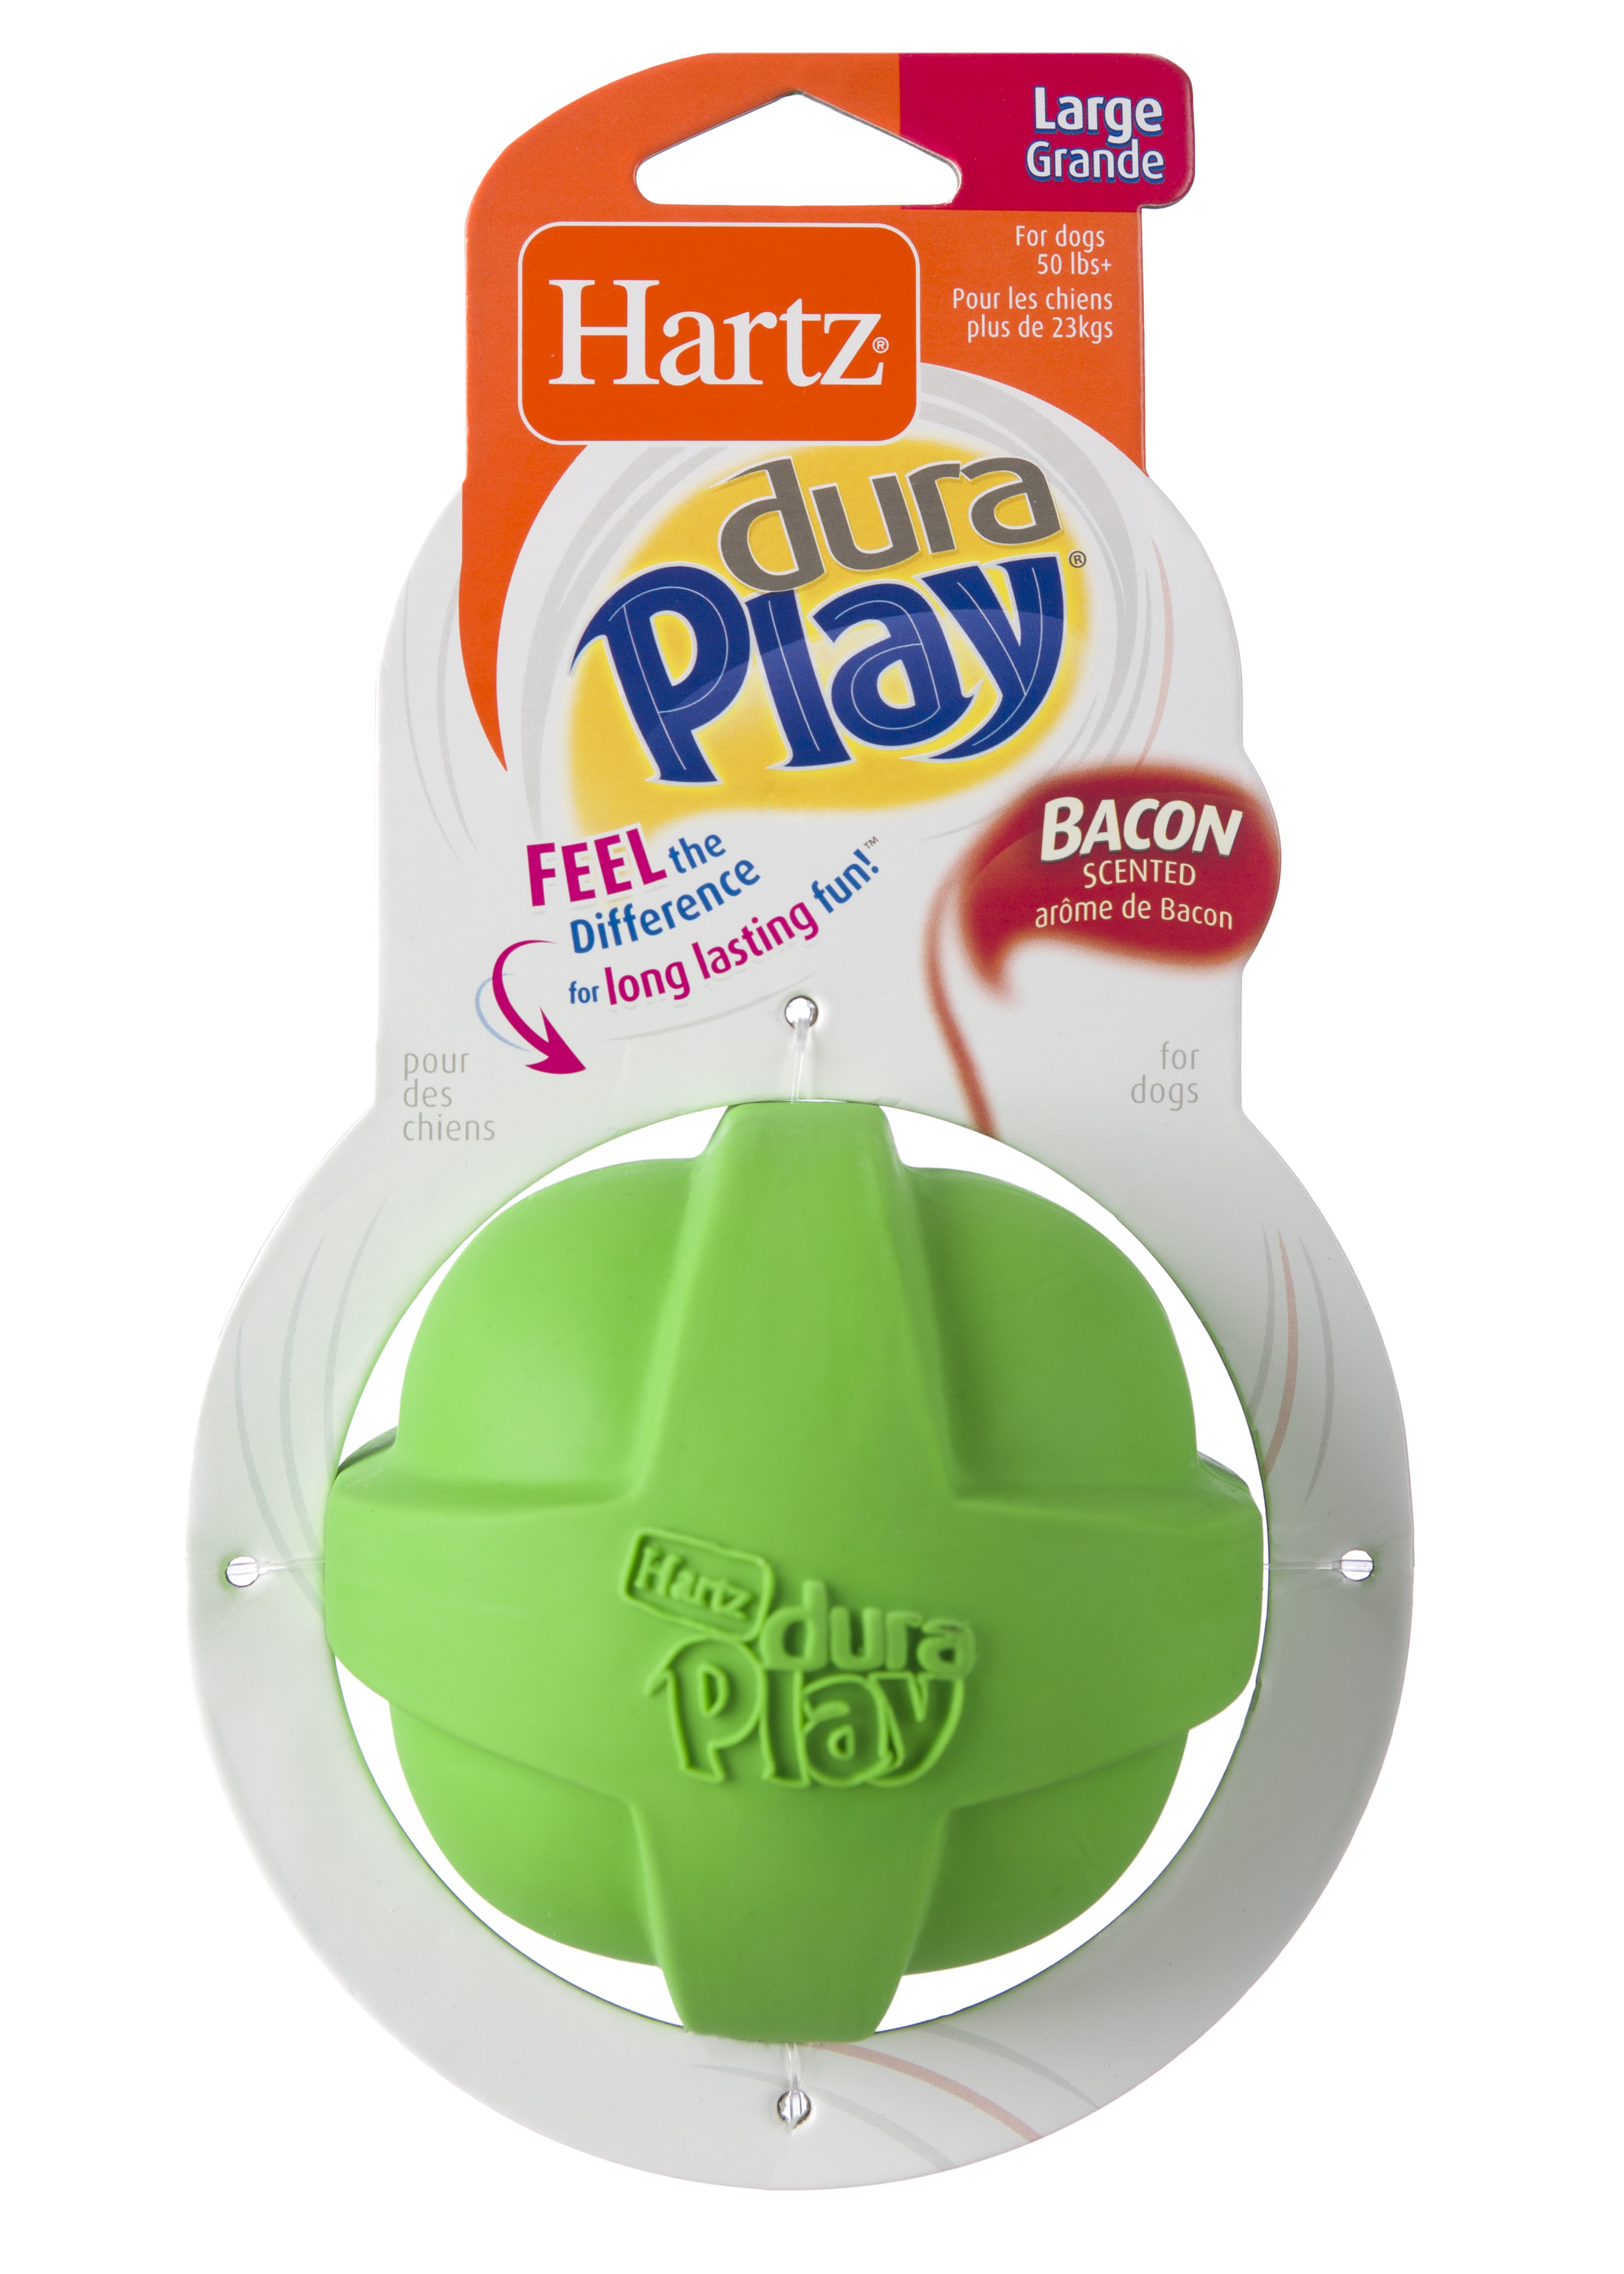 Hartz Dura Play Ball Dog Toy, Large, Color May Vary - image 3 of 5